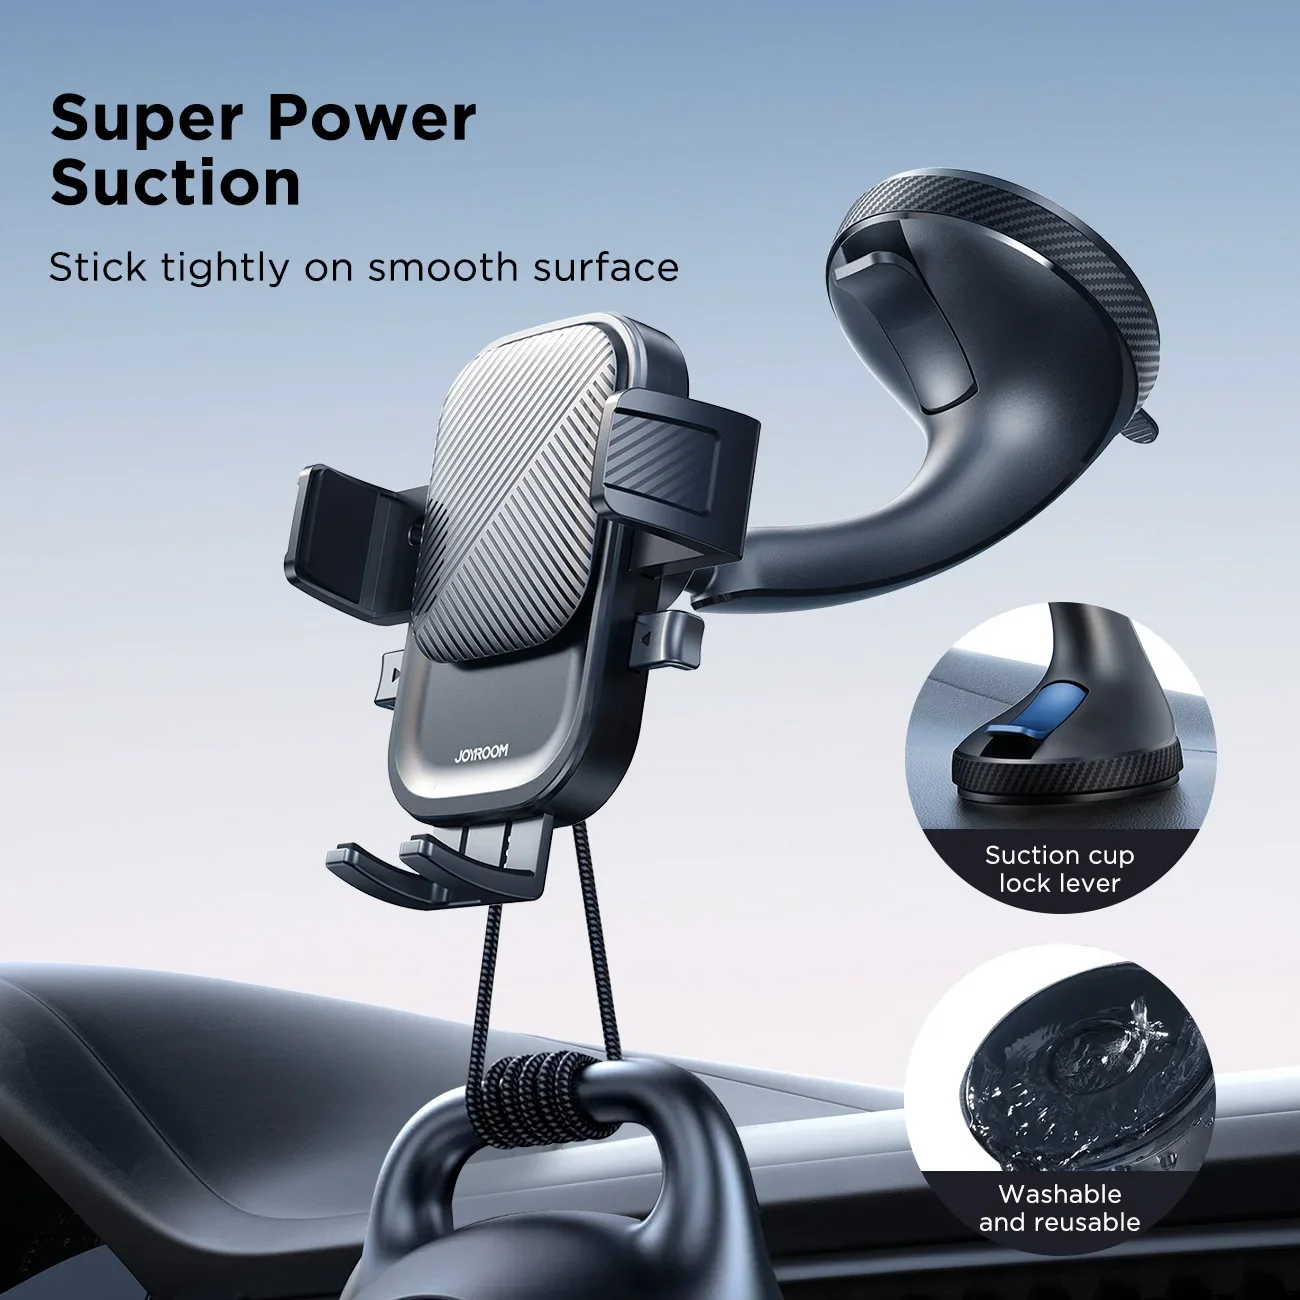 

Joyroom Car Strong Suction Phone Holder Hands-Free Universal Cell Phone Holder Mount For Dashboard/Windshield 360° Rotation